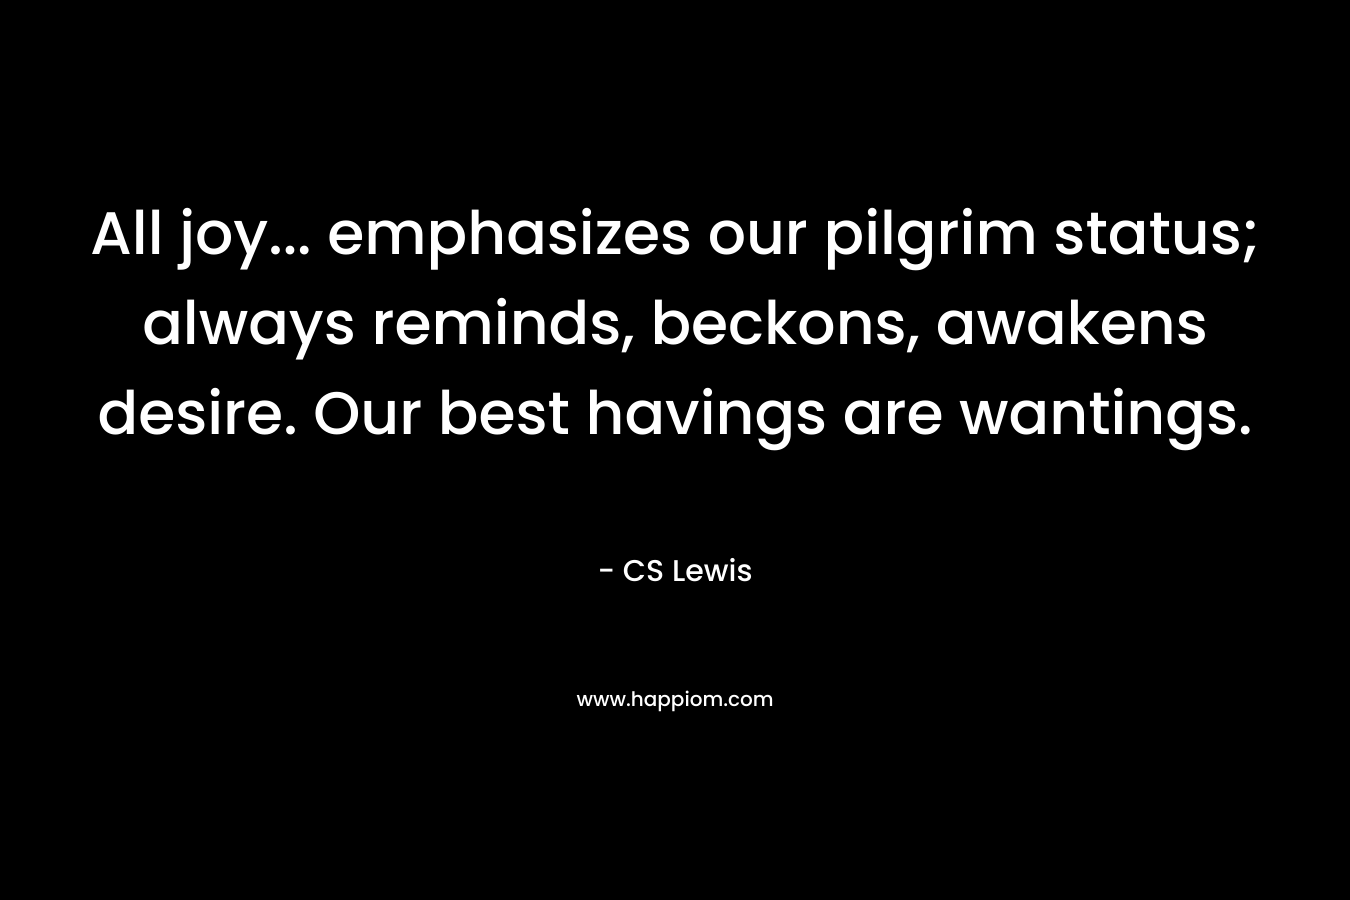 All joy... emphasizes our pilgrim status; always reminds, beckons, awakens desire. Our best havings are wantings.